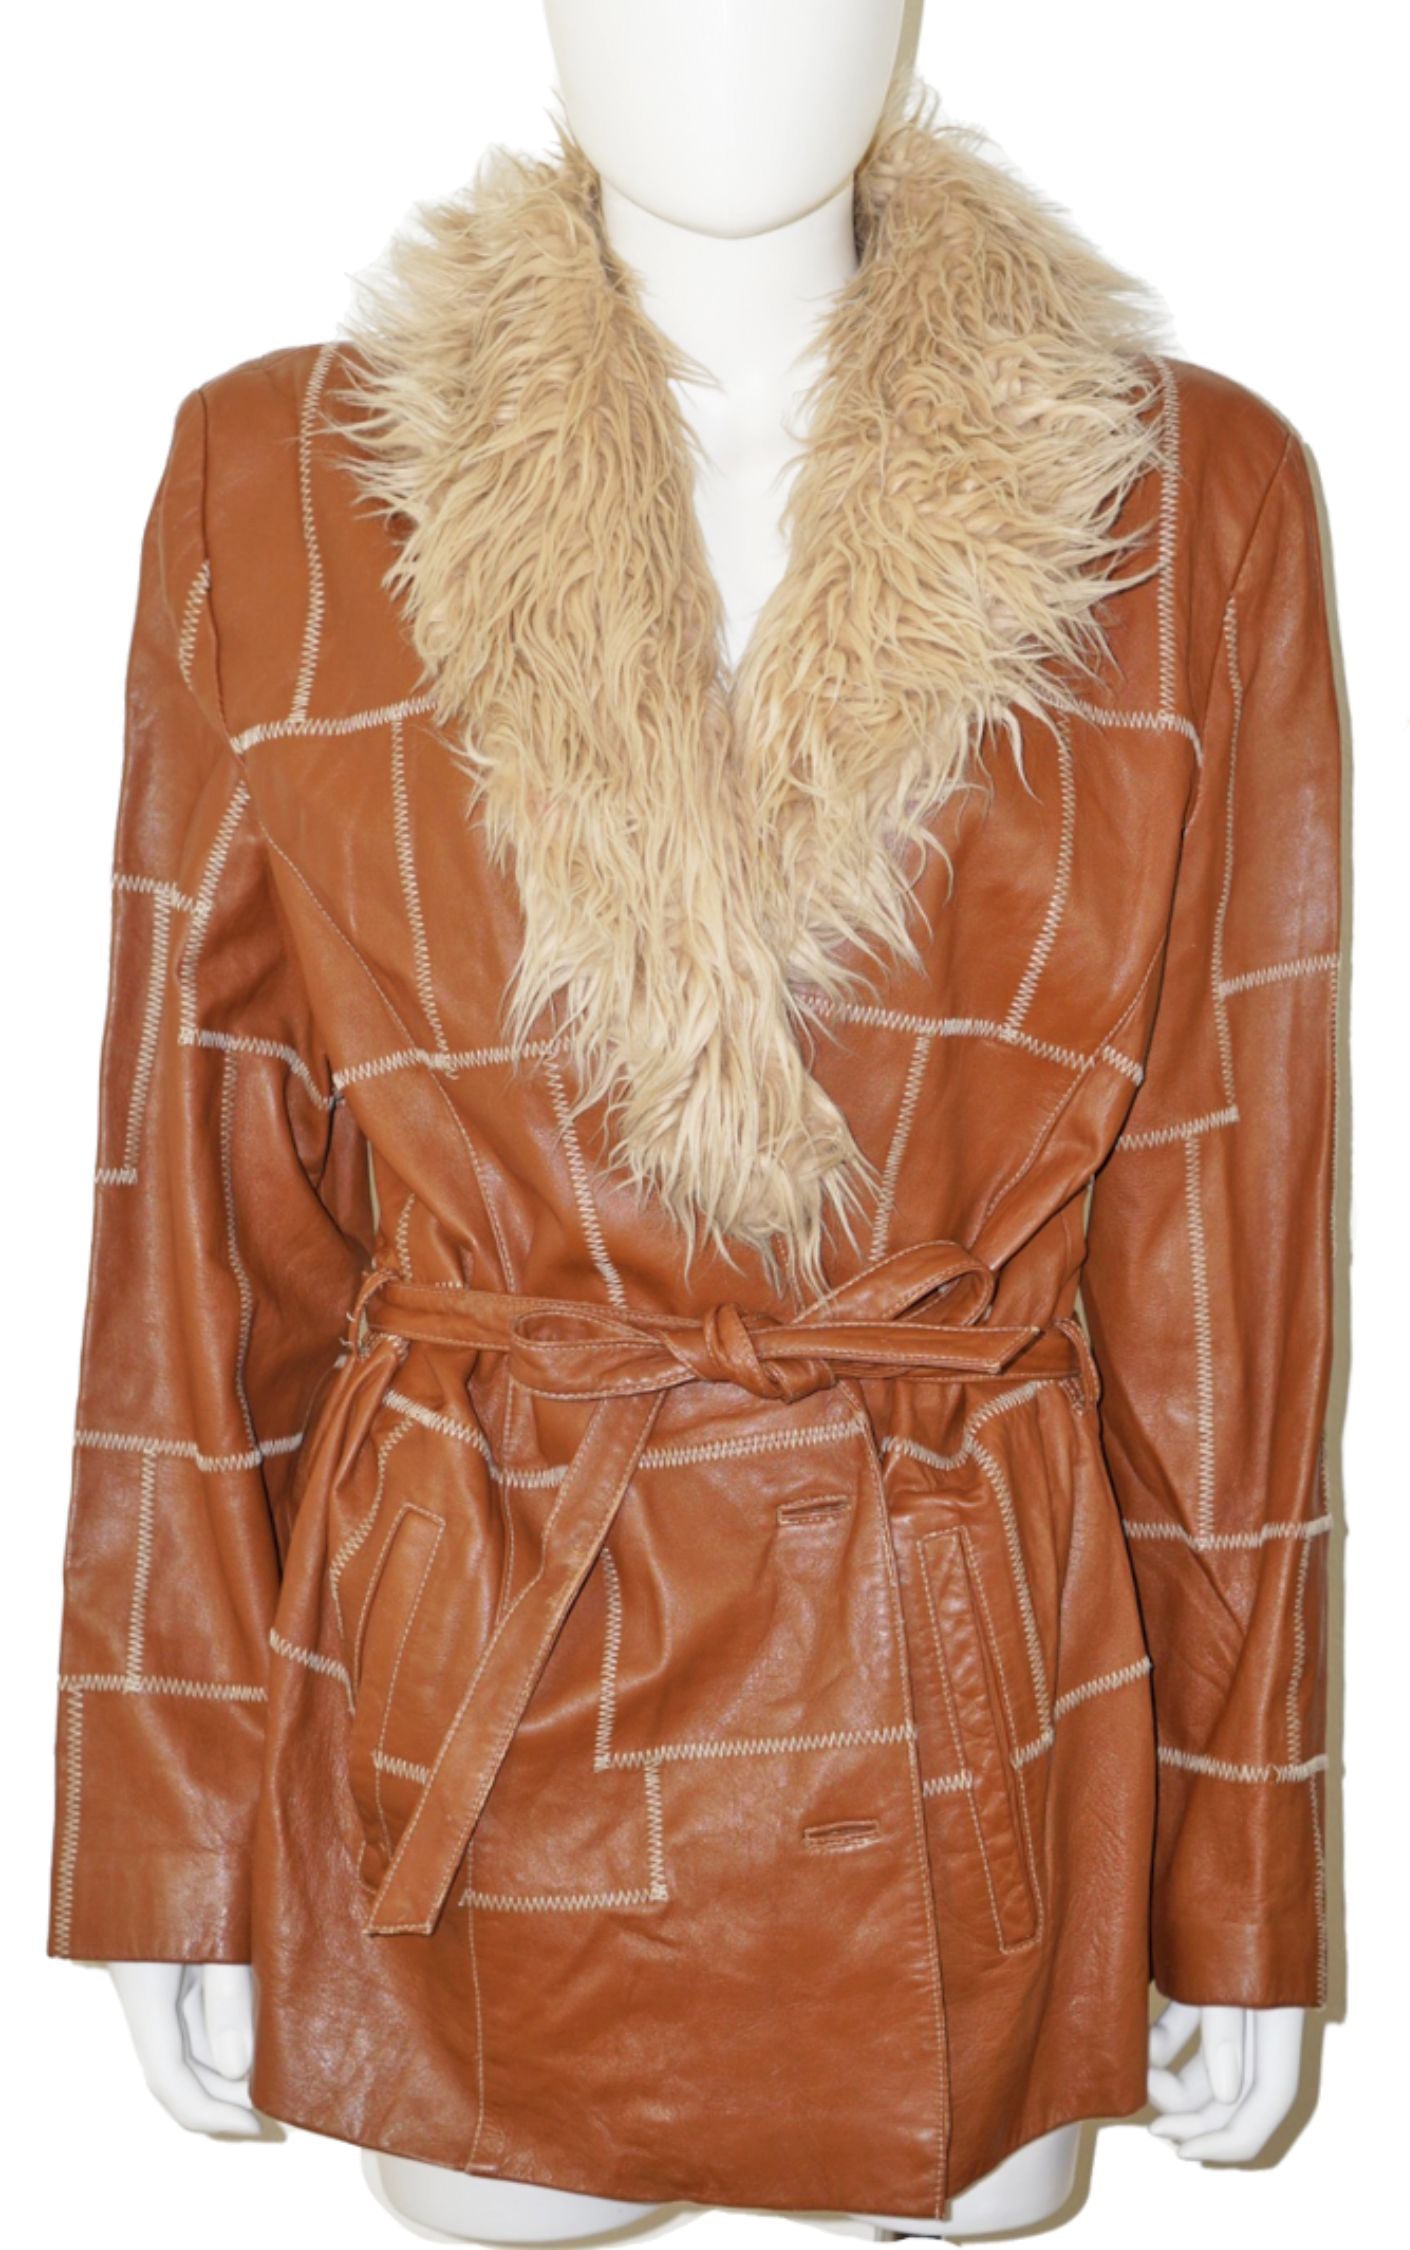 WILSON LEATHER Patchwork Brown Penny Lane Coat resellum